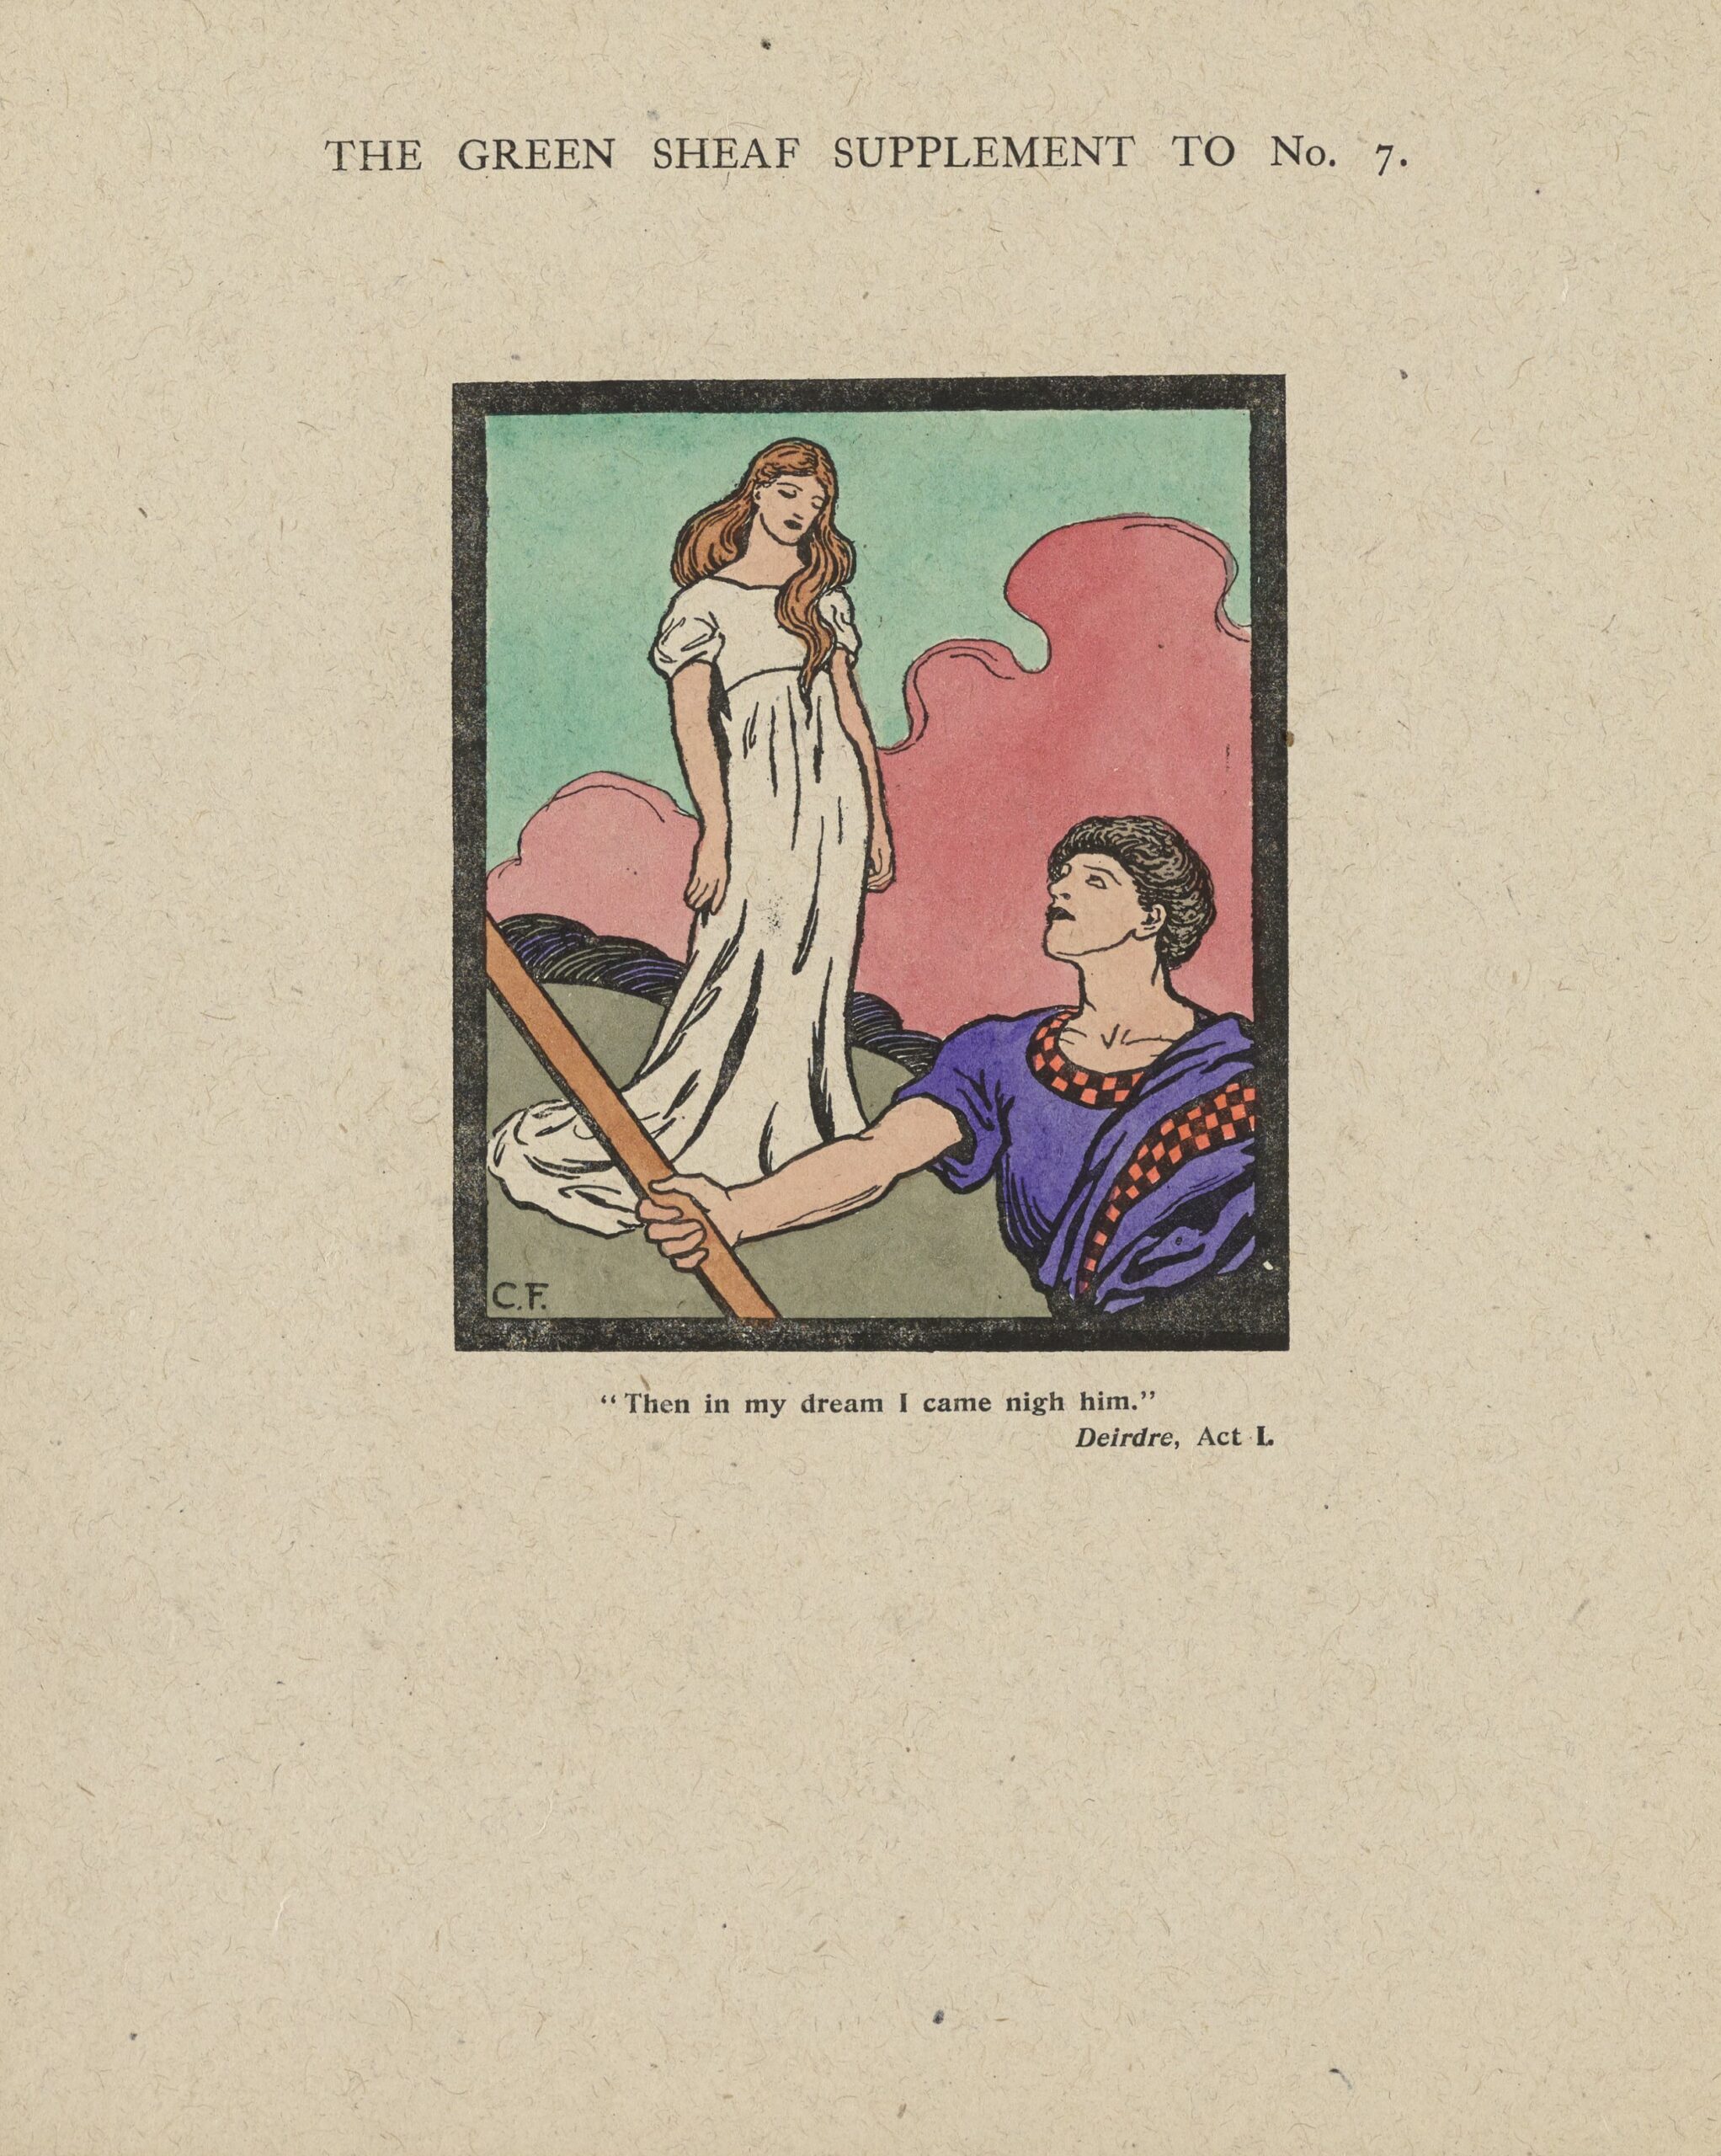 The hand-coloured illustration is framed with a thick black rectangular border, in portrait orientation. On the left middleground, a pale-skinned young woman (Deirdre) with long, golden hair and a white dress stands atop a hill, eyes downcast, or perhaps shut in sleep, as she is dreaming. She looks down toward the right of the frame, at a young man (Naisi). He stands in the right foreground, only partly in frame, depicted from the waist up. Also pale-skinned, his head is raised to look up at the woman. He wears a purple robe with a red-and-black checked collar and sash. He holds a brown staff in his right hand. In the background, pink clouds contrast against a blue sky. The artist’s monogram is in the bottom left corner of the frame. Below the image is printed: “’Then in my dream I came night on him.’ Deirdre, Act I.”